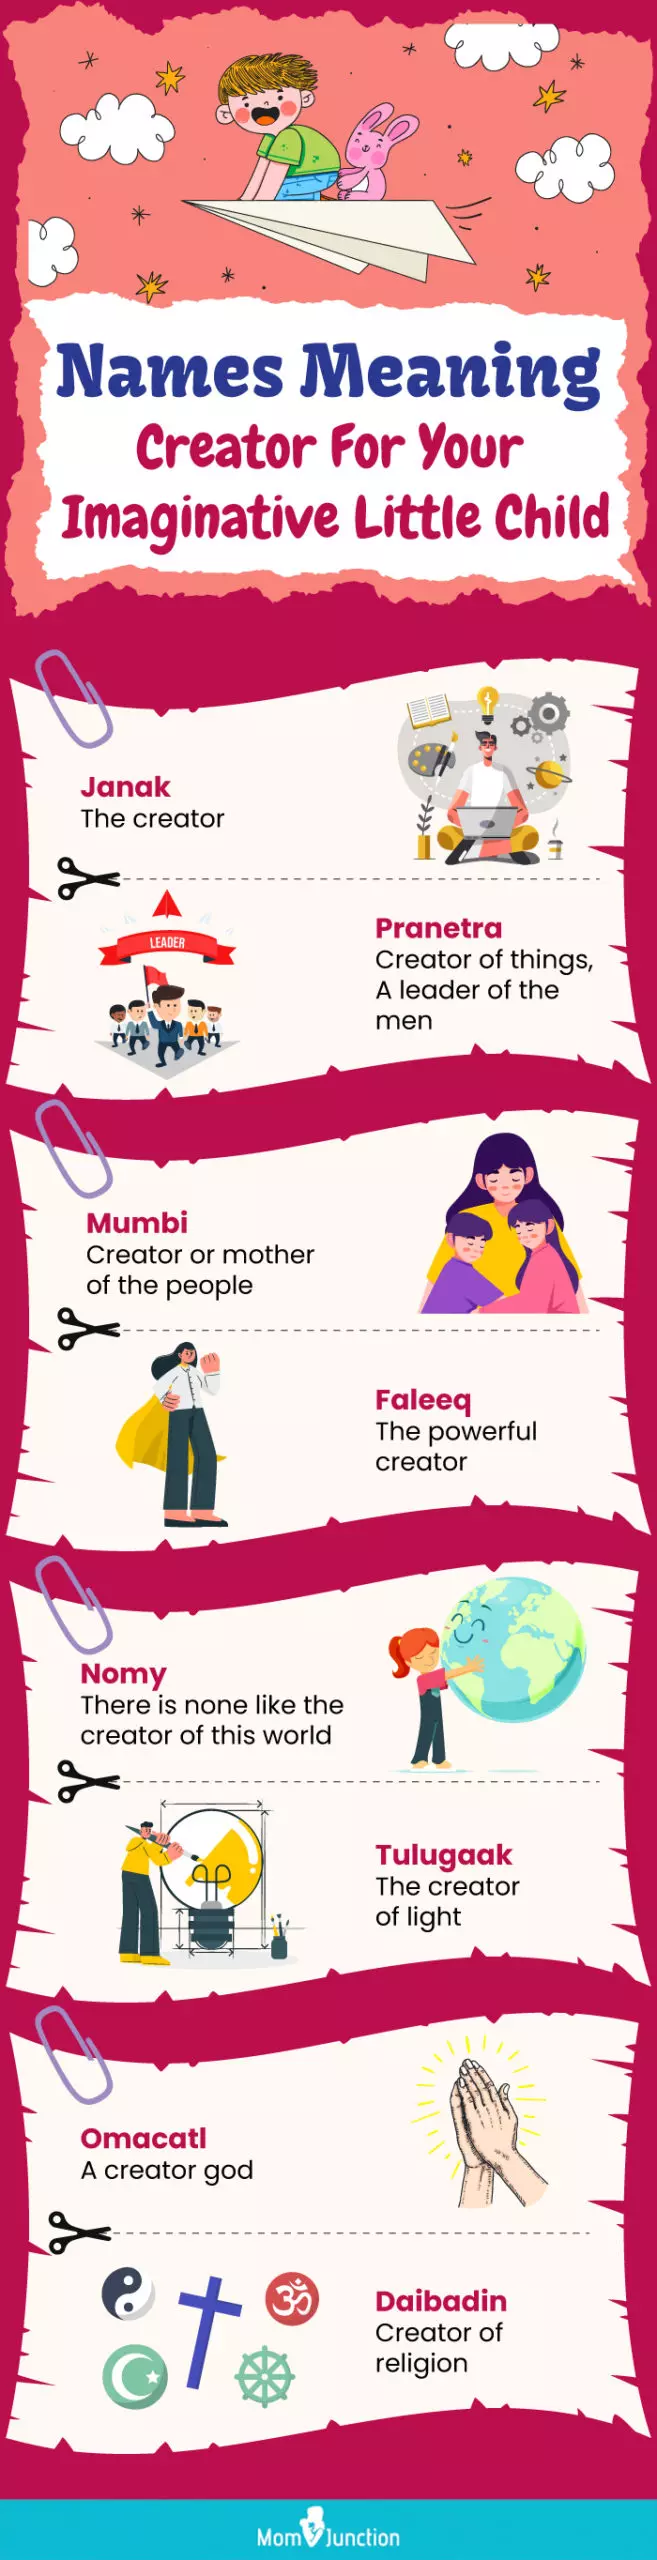 names meaning creator for your imaginative little child (infographic)